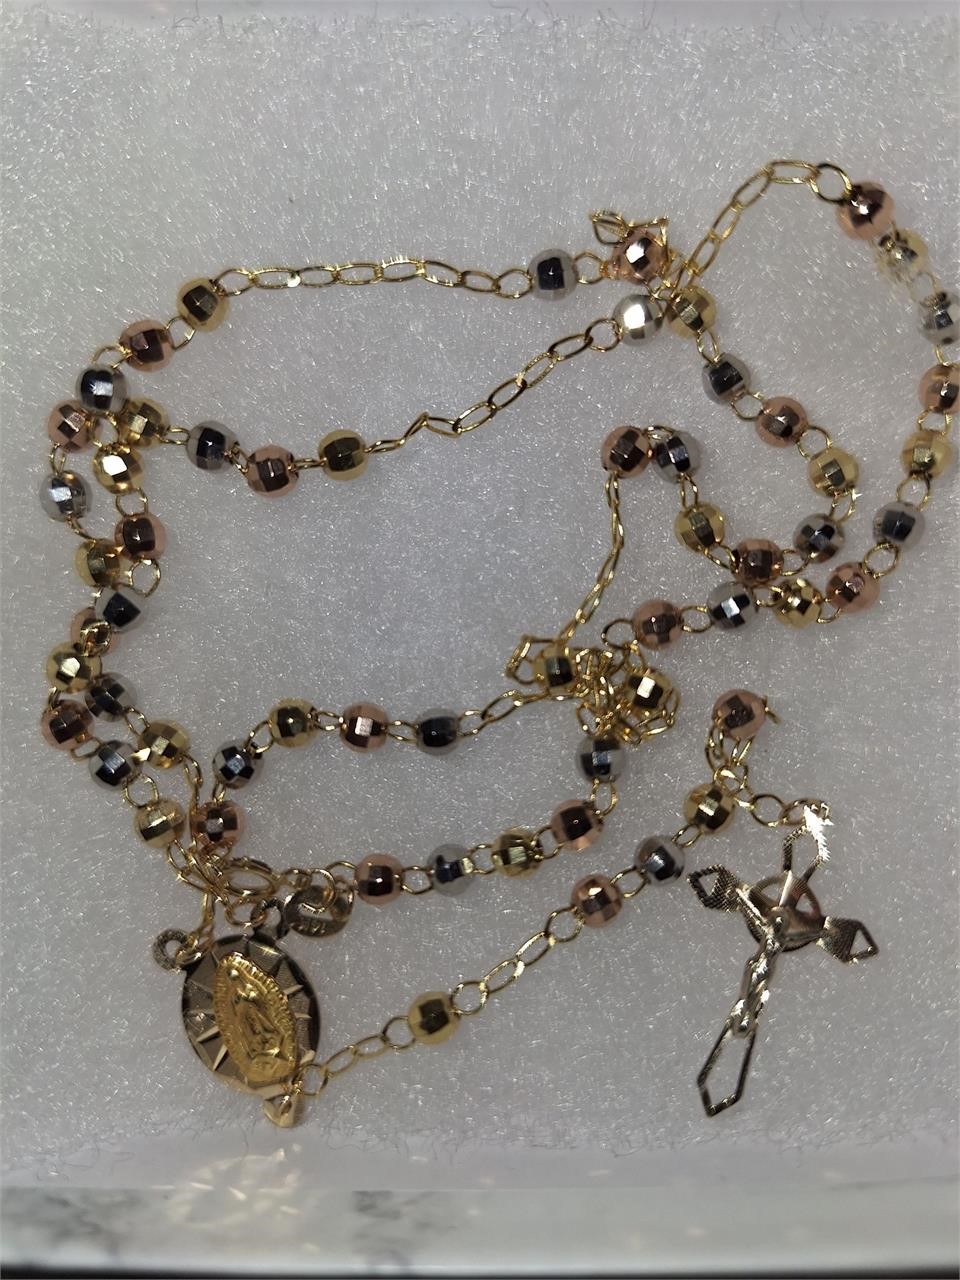 14k 3 different color Gold Rosary